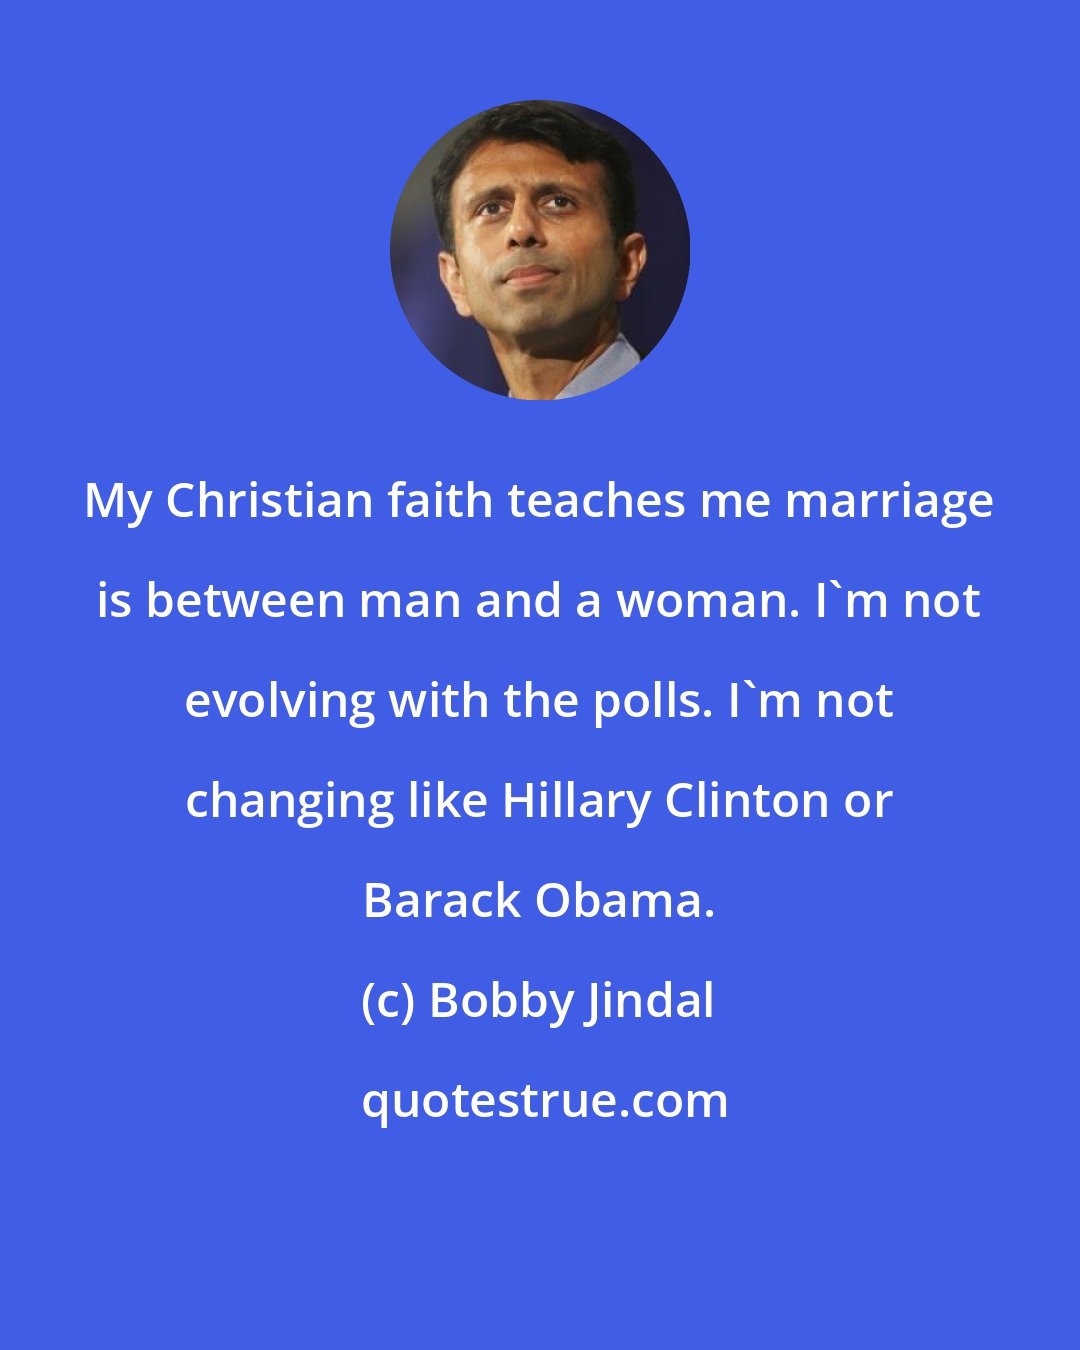 Bobby Jindal: My Christian faith teaches me marriage is between man and a woman. I'm not evolving with the polls. I'm not changing like Hillary Clinton or Barack Obama.